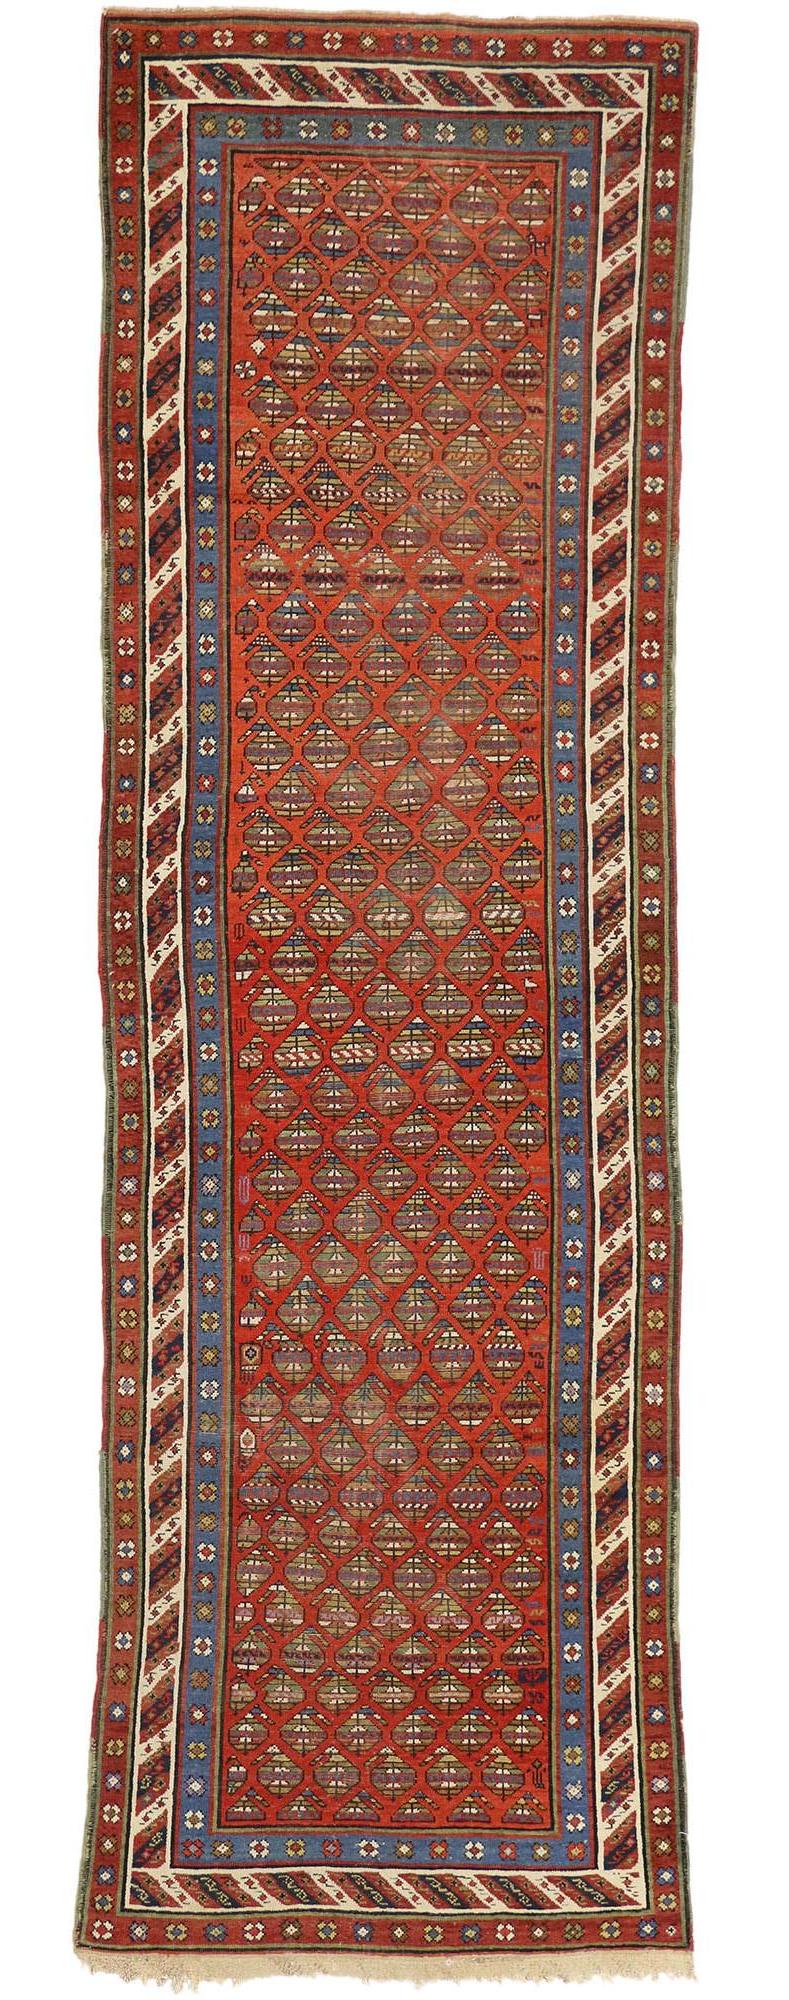 73231 Antique Caucasian Shirvan Boteh Runner with Tribal Style, Hallway Runner 03'03 x 11'00. This antique Caucasian Shirvan hallway runner displays an all-over repetitive pattern of opulent boteh motifs. The widely used boteh motif is thought to